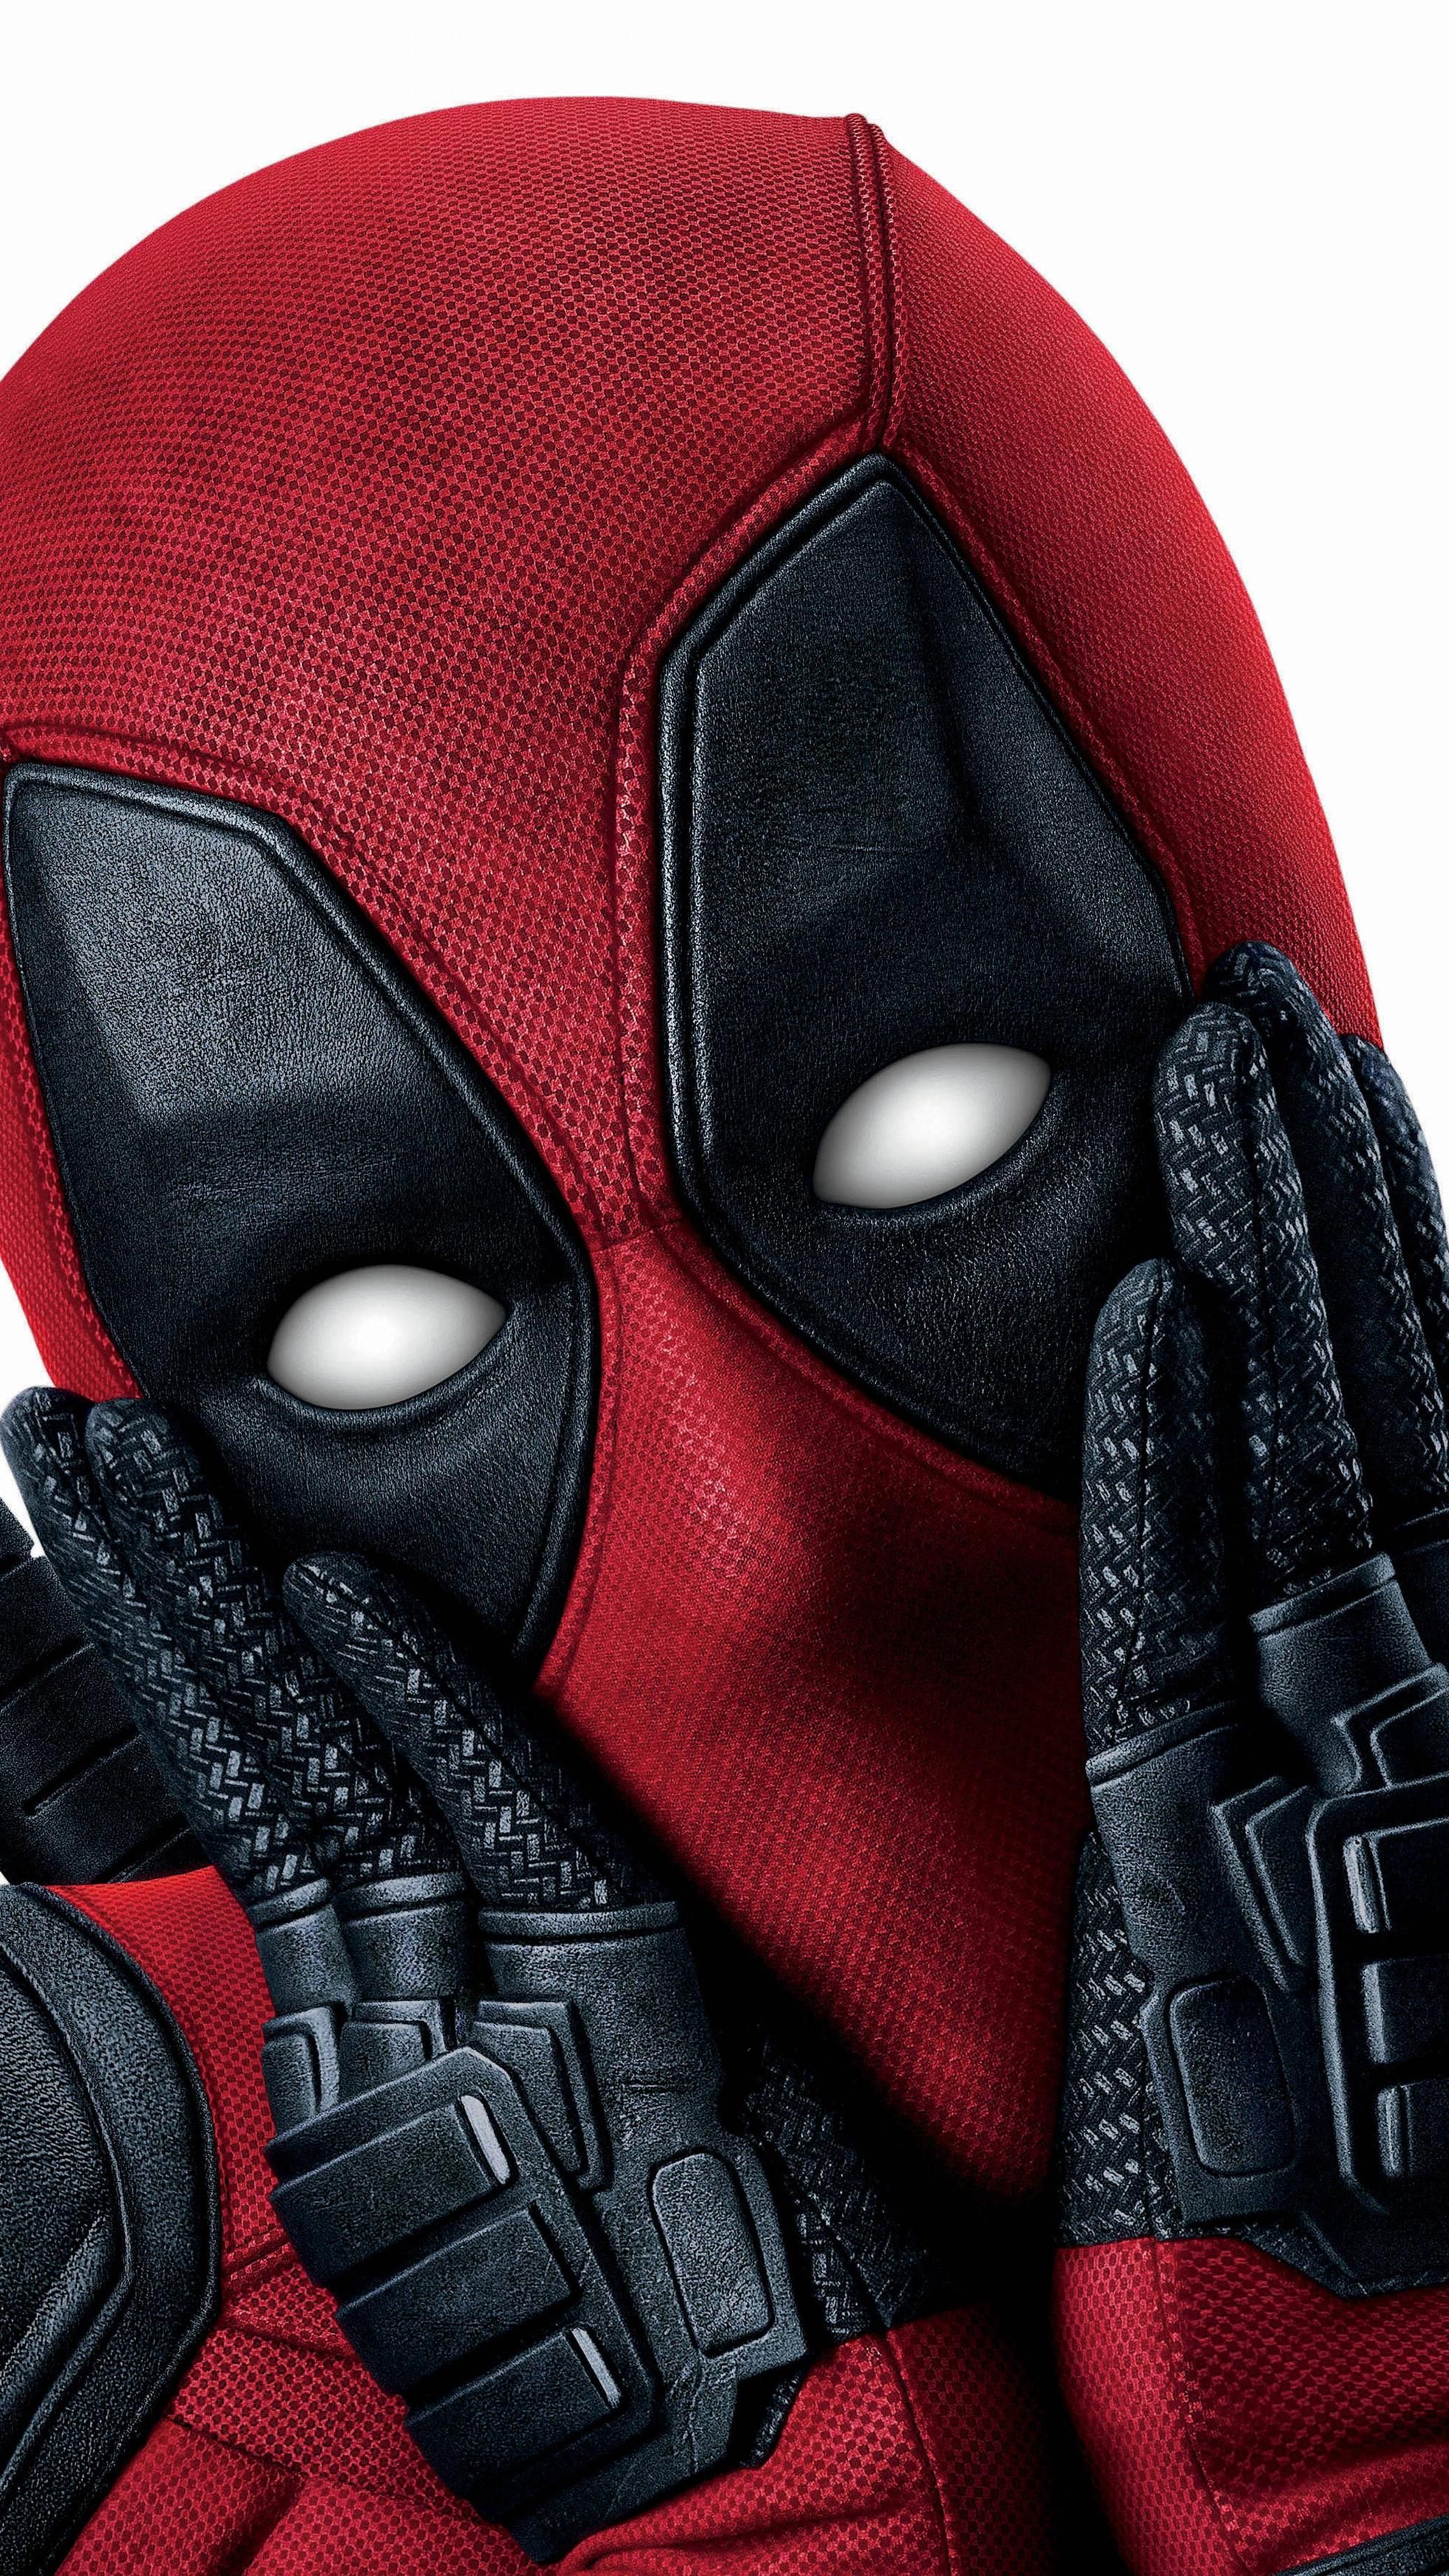 1080p And Some 4k Wallpaper For Phones Superheroes Deadpool